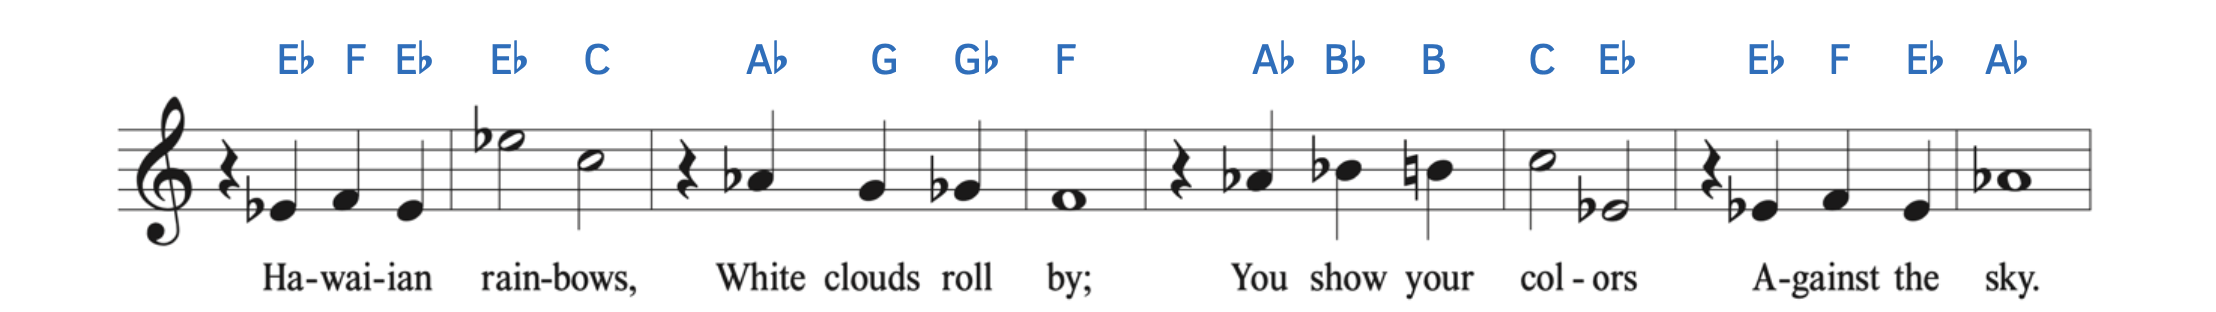 The music to "Hawaiian Rainbows." The pitches in measure 1 are E-flat4, F4, and E-flat4. Only the first E-flat has a flat. The pitches in measure 2 are E-flat5 and C5. There is a flat in front of E-flat5. The pitches in measure 3 are A-flat4, G4, and G-flat4. There are flats in front of the A-flat and G-flat. The pitch in measure 4 is F4. The pitches in measure 5 are A-flat4, B-flat4, and B-natural4. Each note has an accidental. The pitches in measure 6 are C5 and E-flat4. There is a flat in front of E-flat. The pitches in measure 7 are E-flat4, F4, and E-flat4. There is only a flat in front of the first E-flat. The last measure has A-flat4 with a flat in front of it.